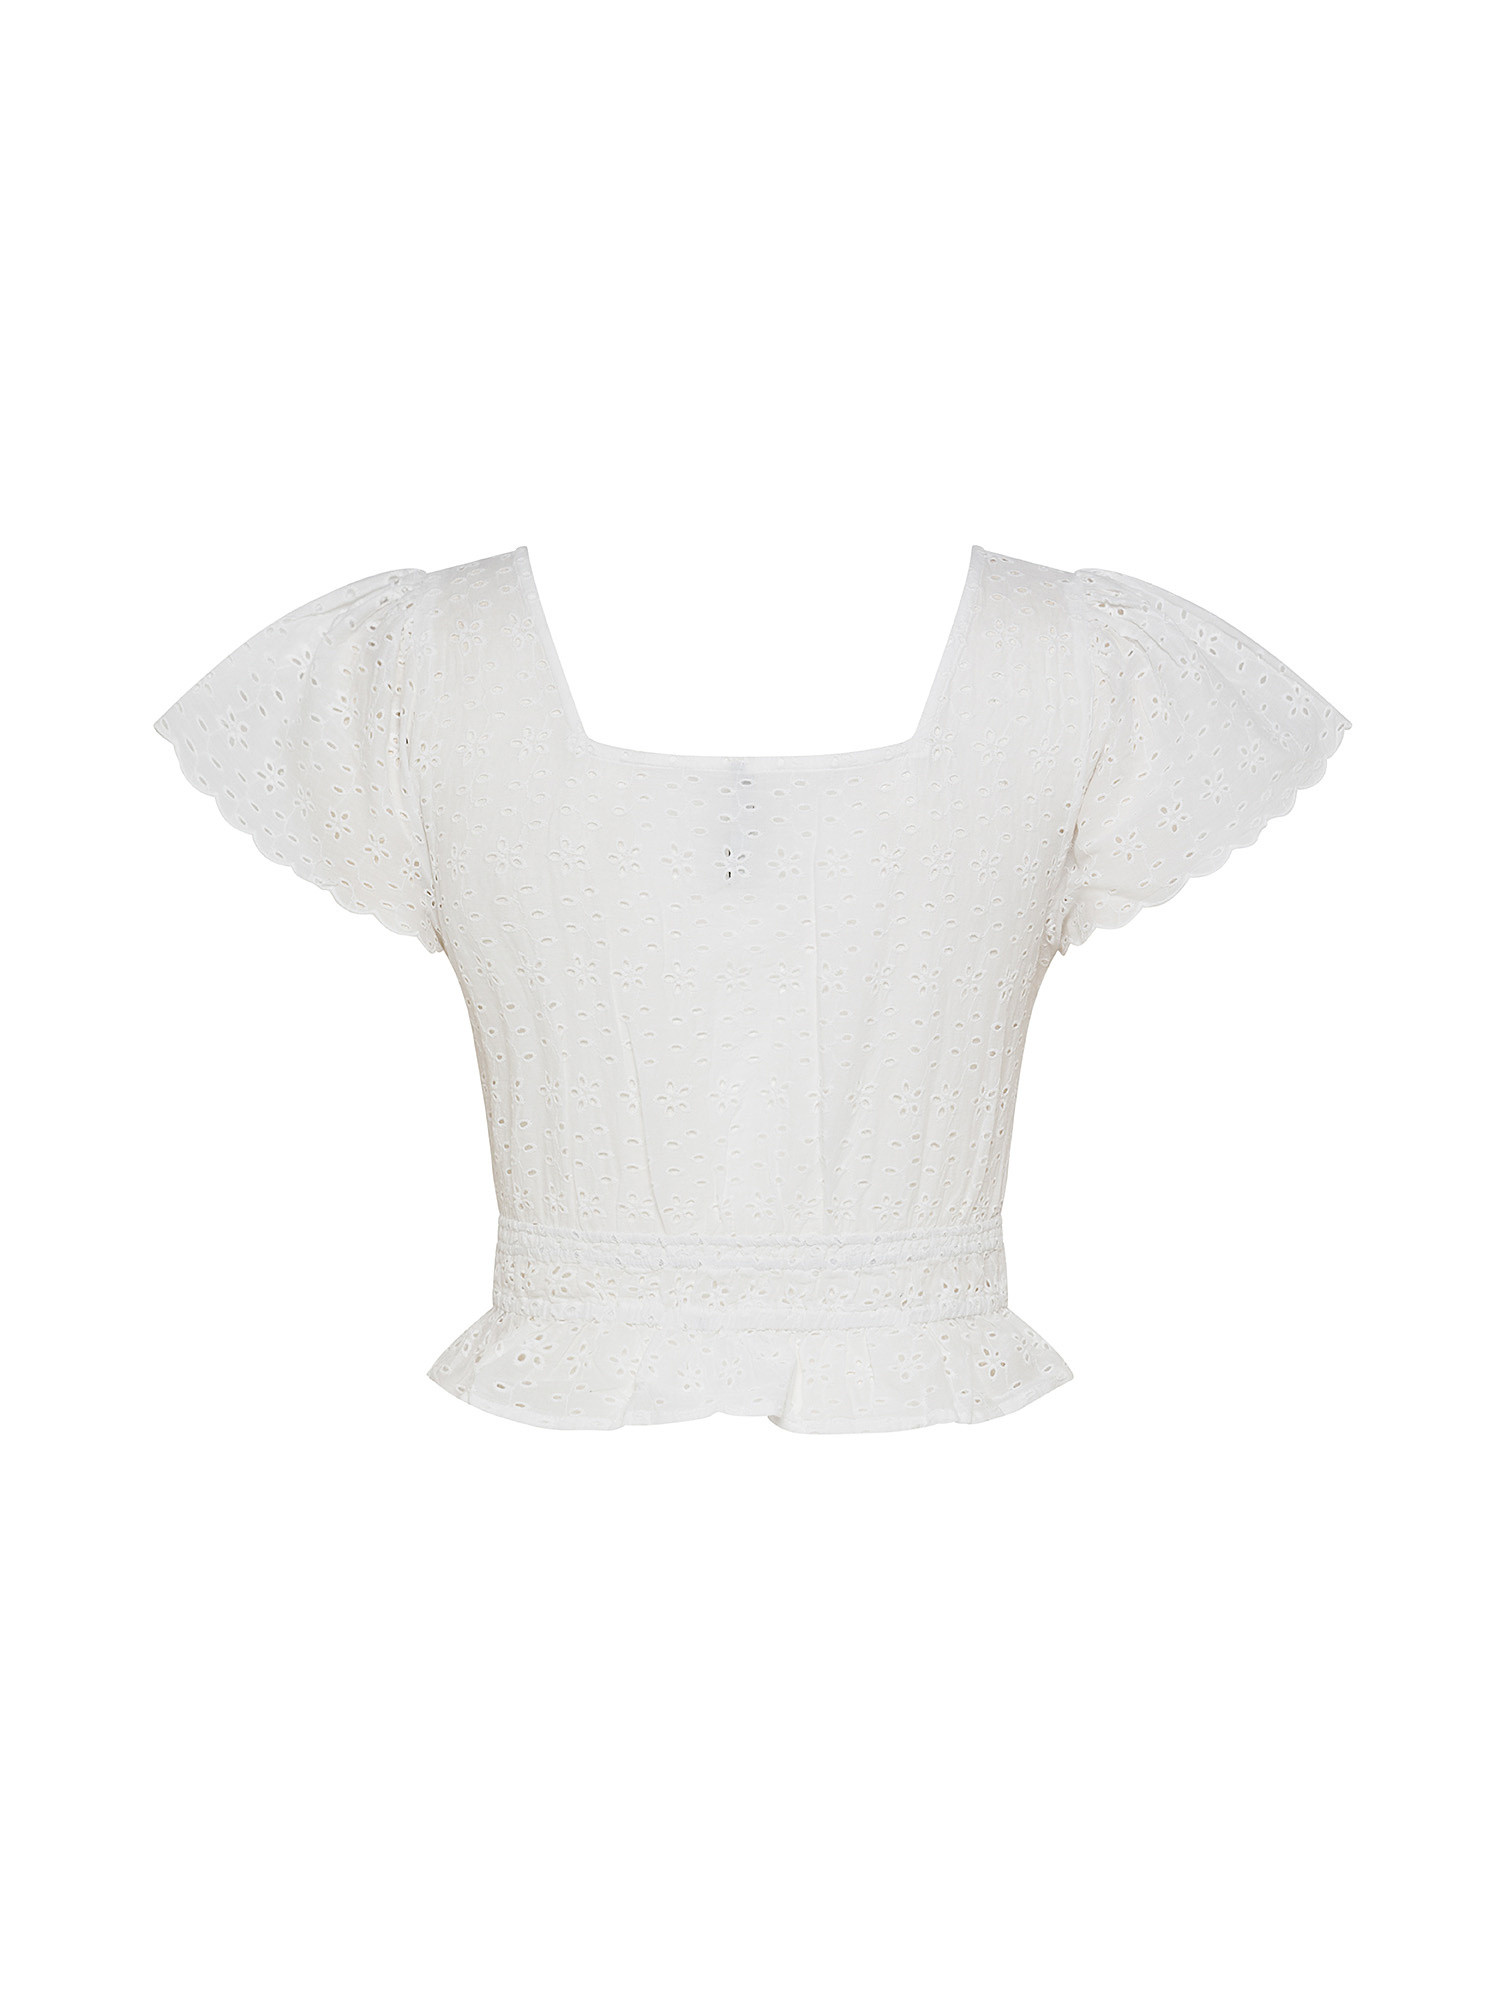 Pepe Jeans - Sangallo lace top in cotton, White, large image number 1